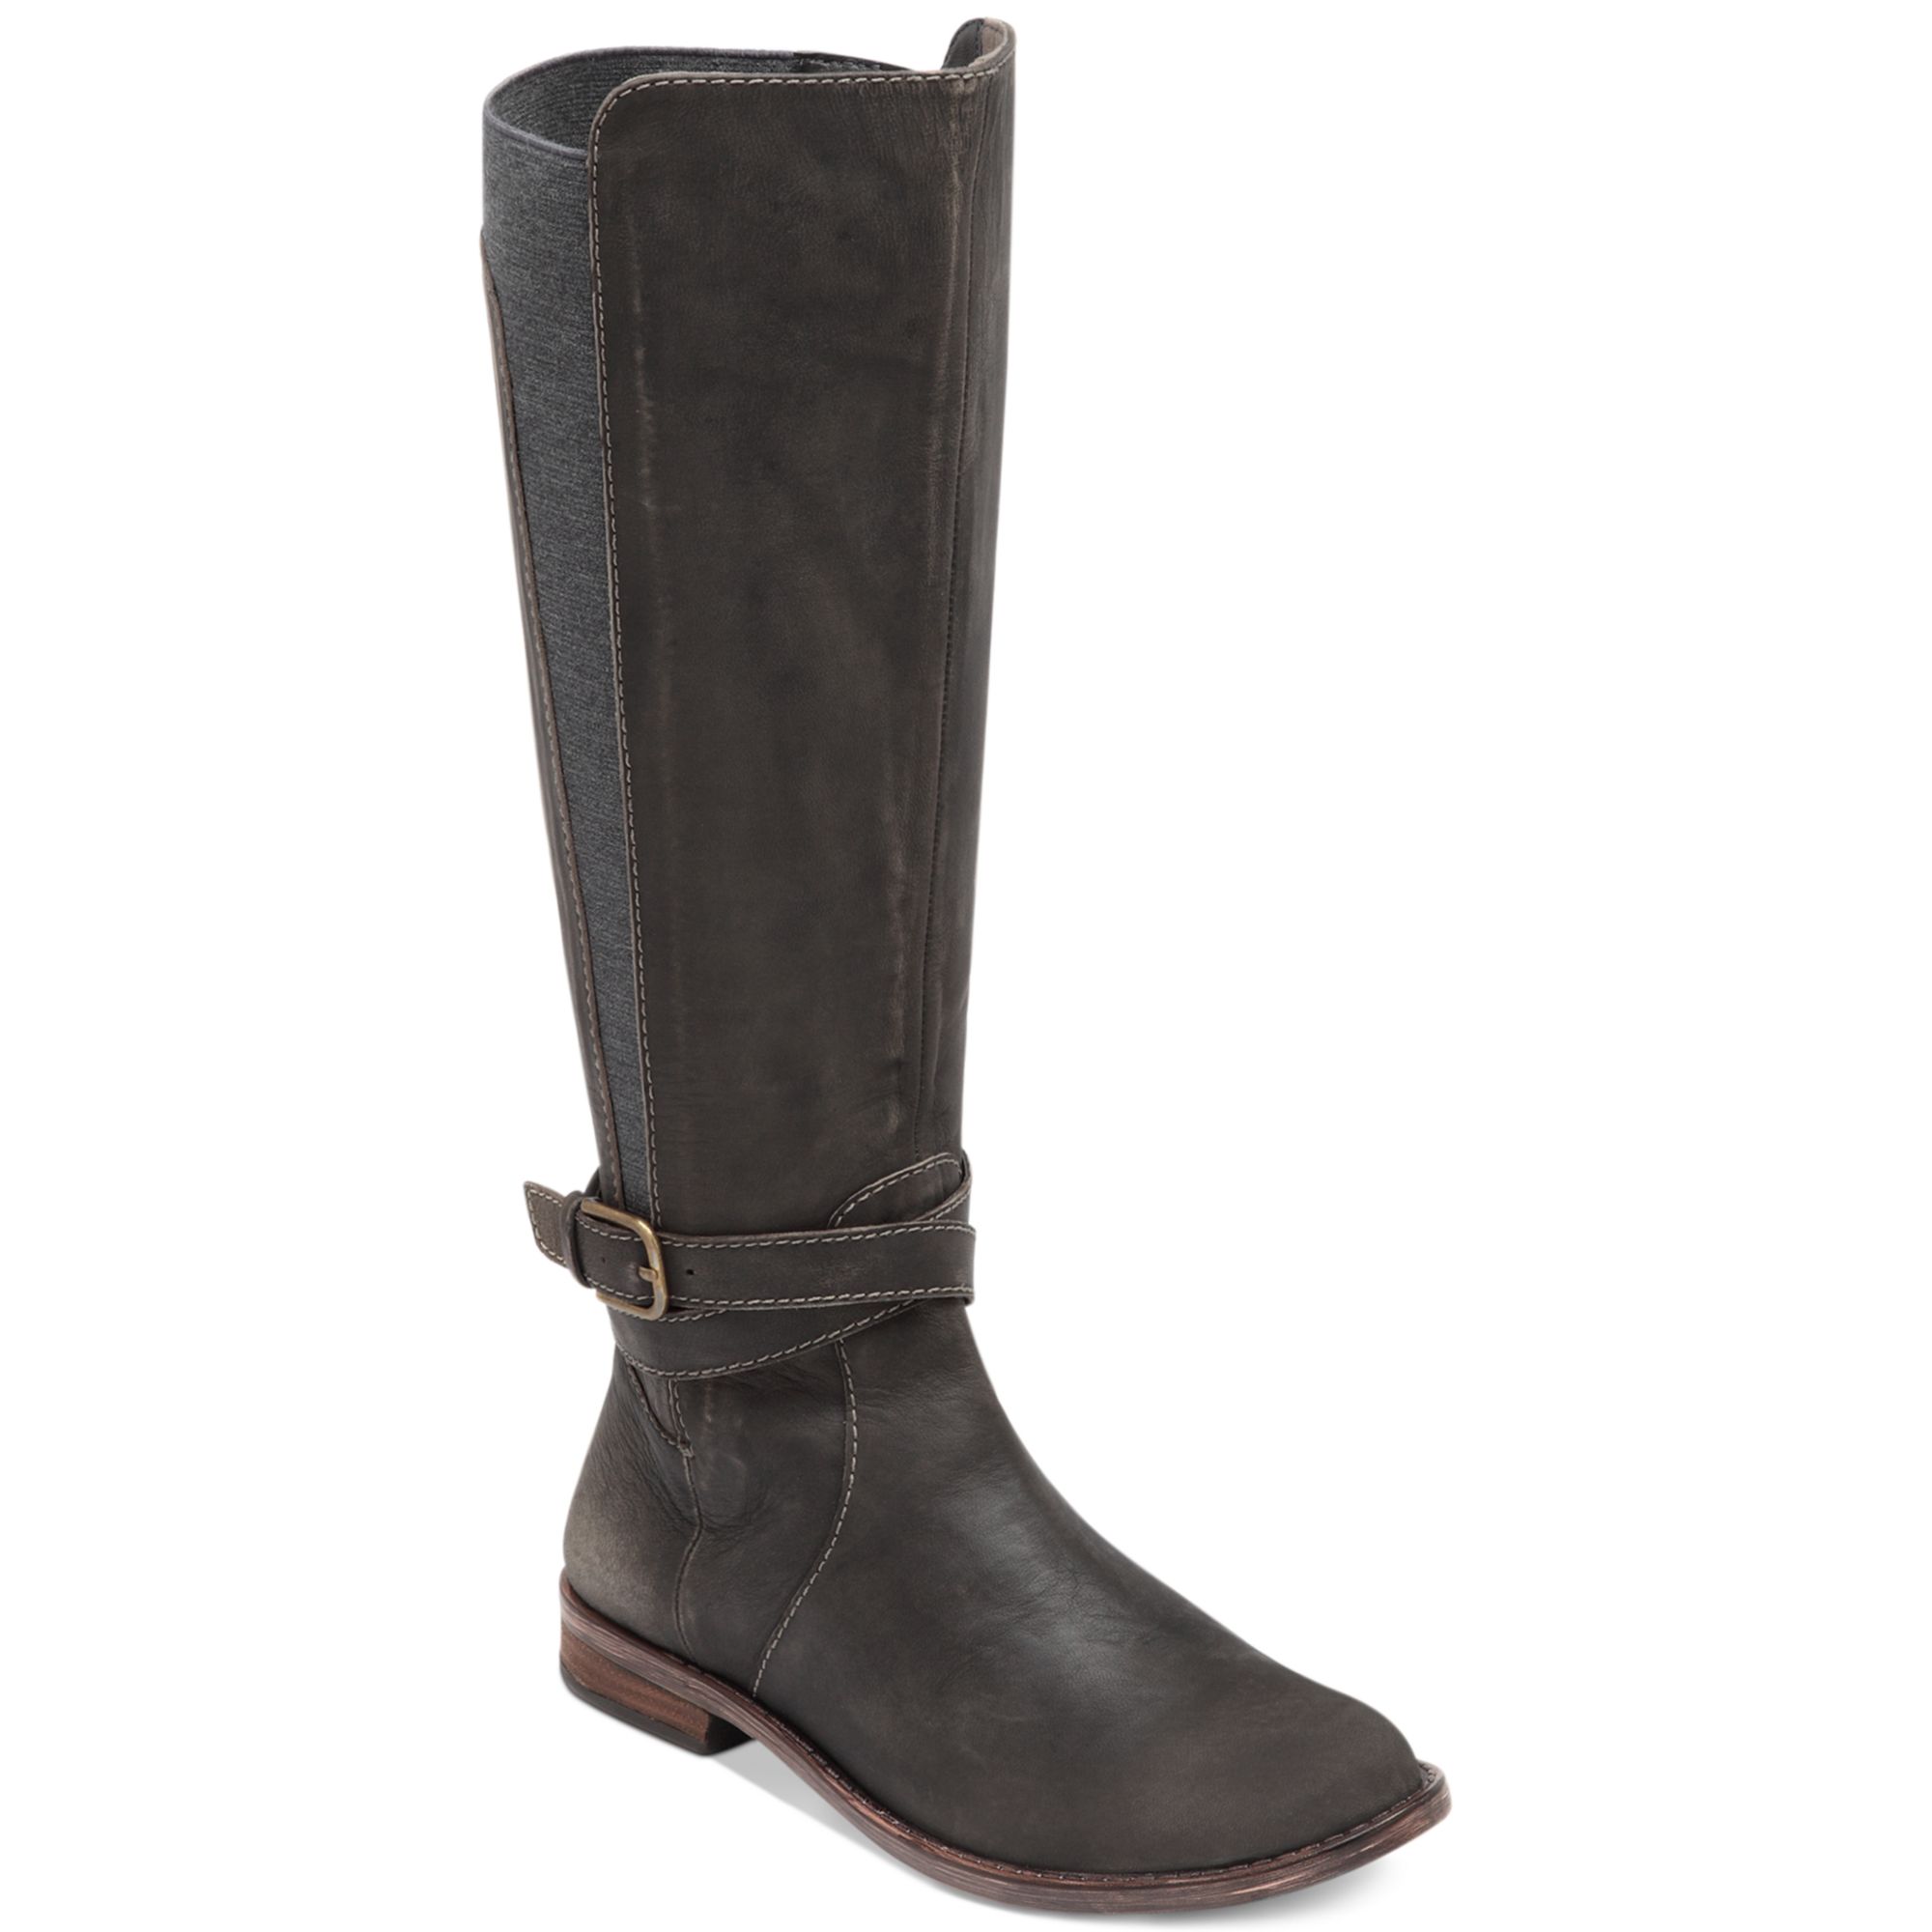 Lyst - Lucky Brand Ostrand Wide Calf Boots in Black